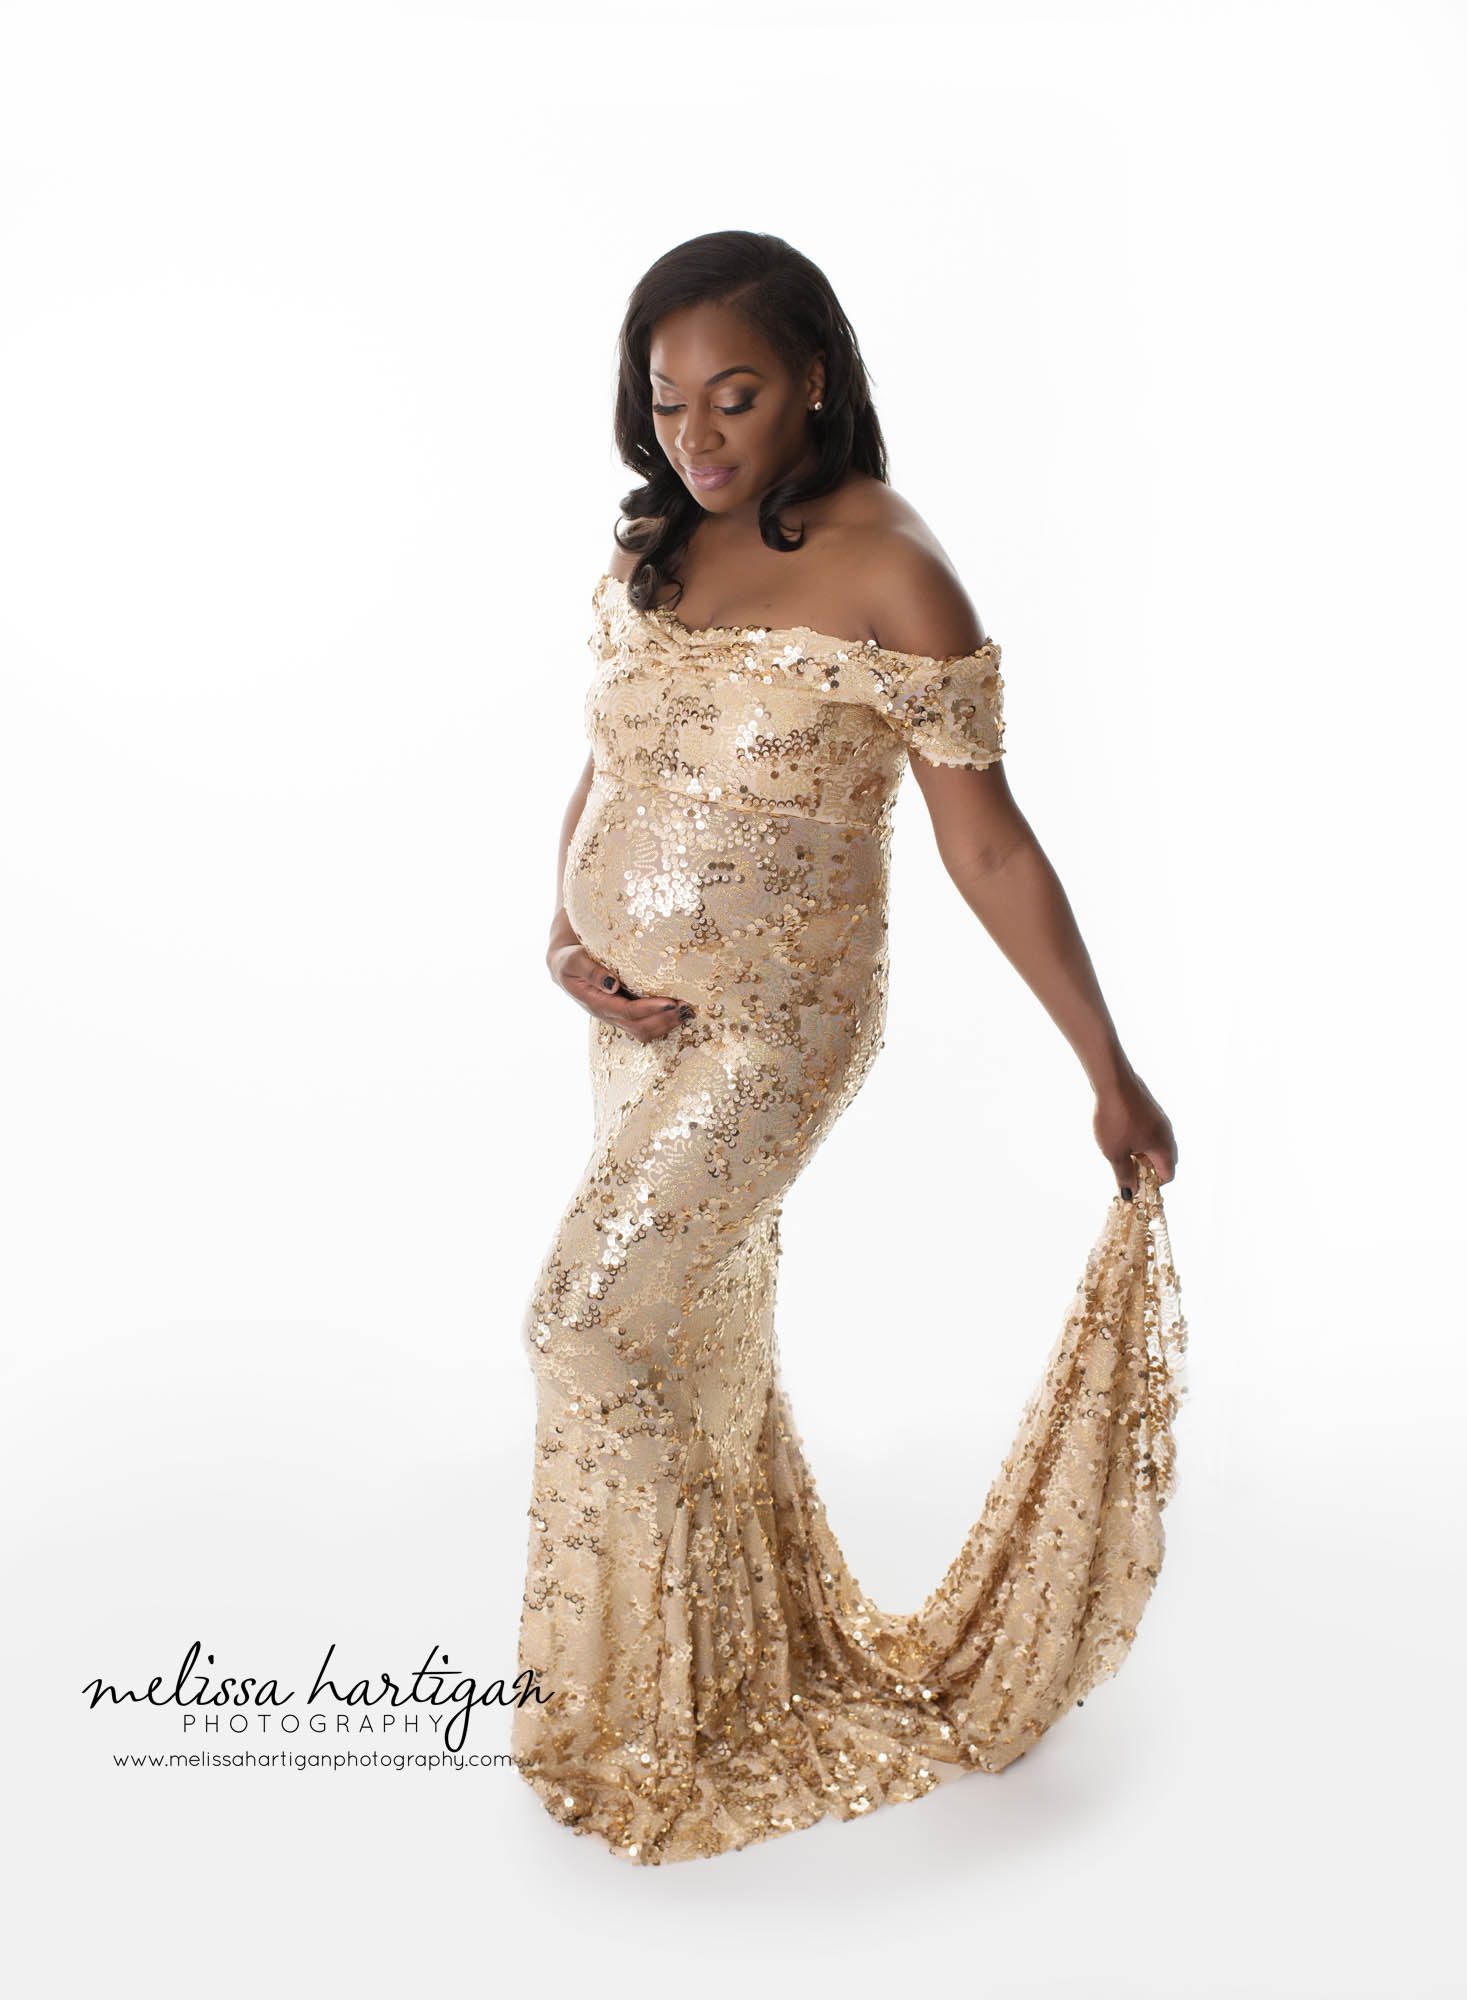 CT Newborn and Maternity Photographer maternity pose mom wearing long gold sequined dress